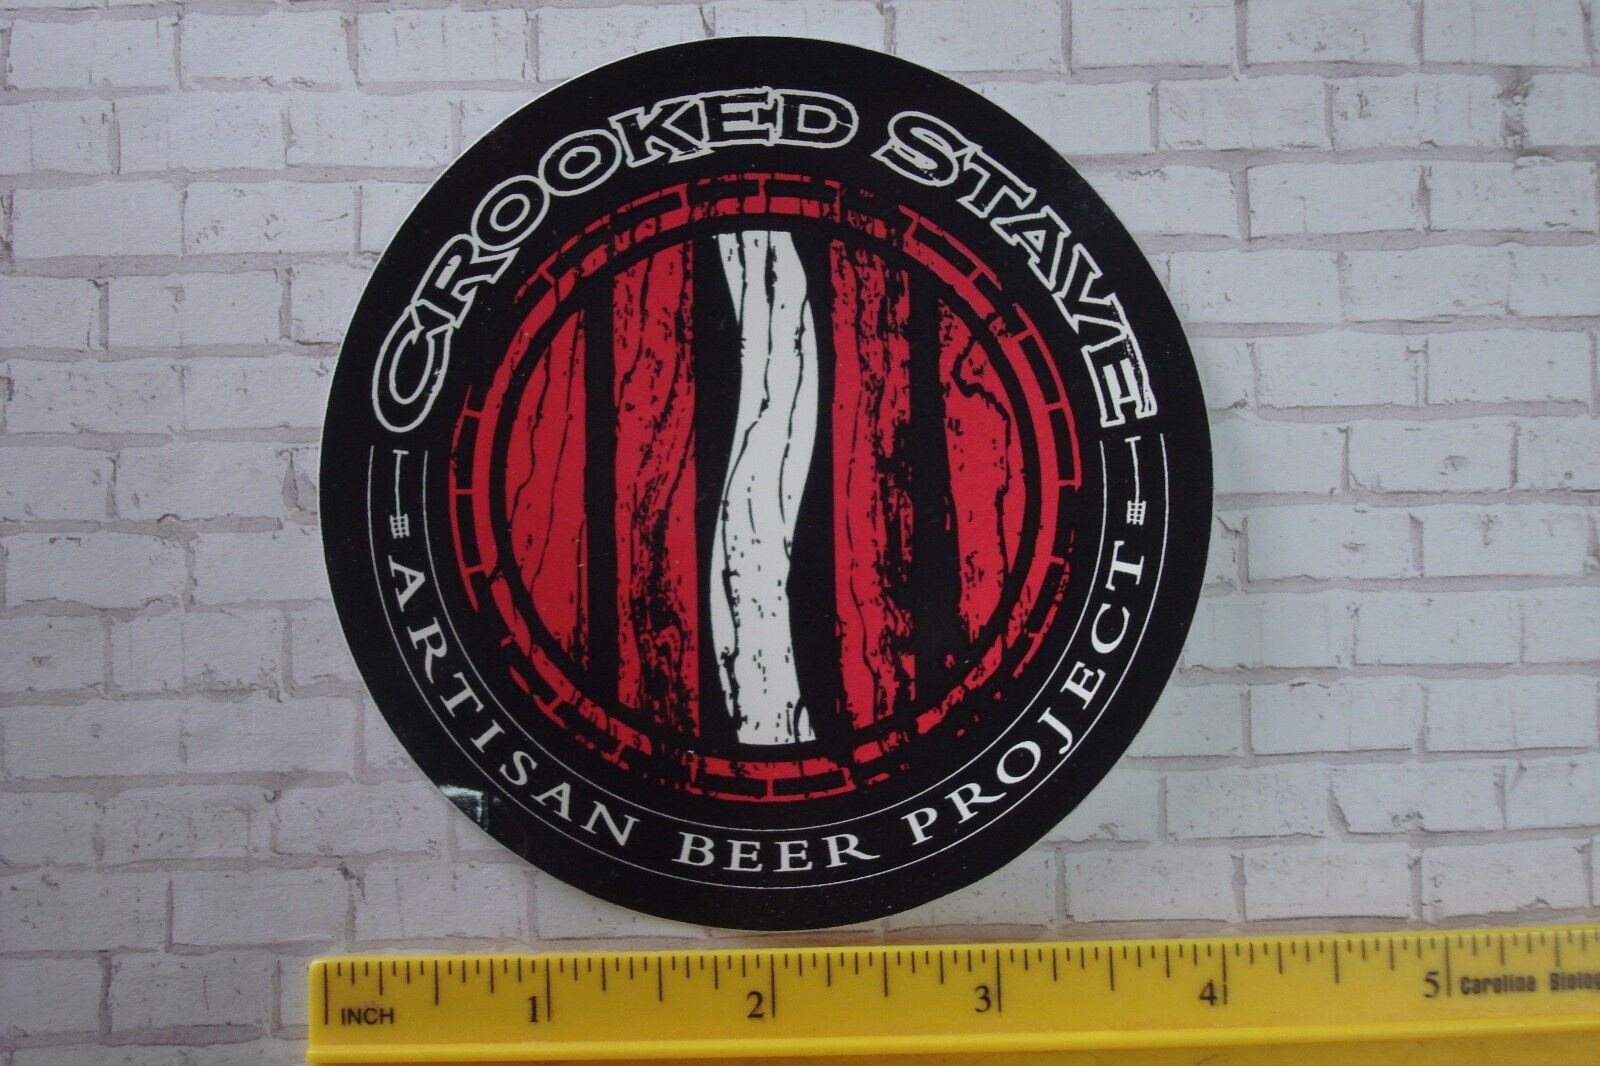 Beer STICKER ~ CROOKED STAVE Brewing Co Artisan Beer Project - Denver, COLORADO